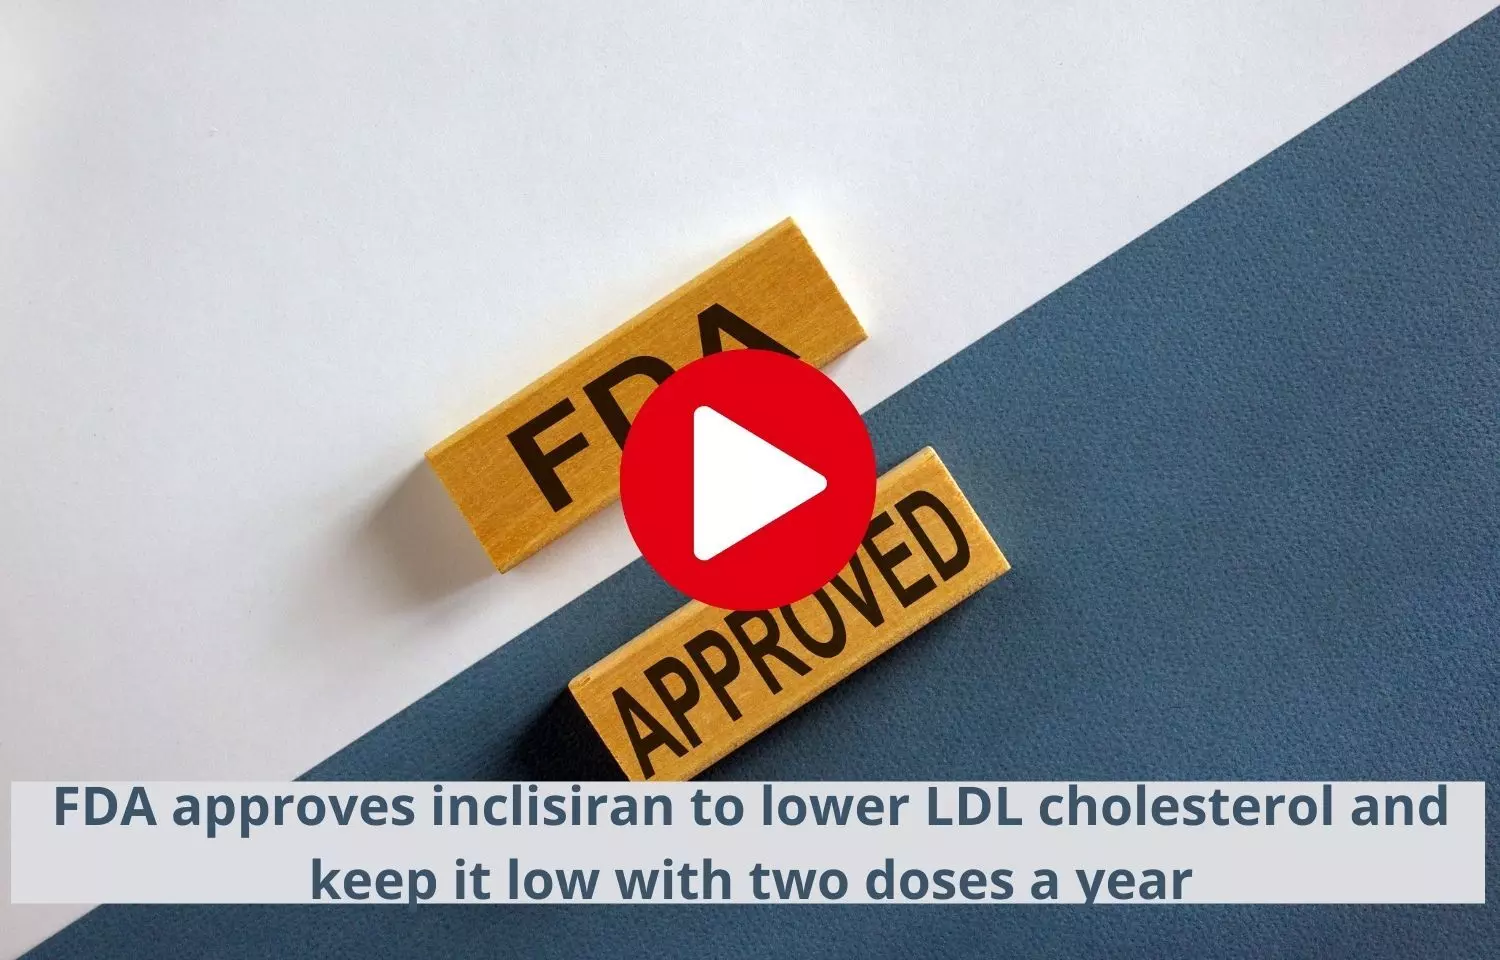 USFDA approves Inclisiran to lower LDL cholesterol